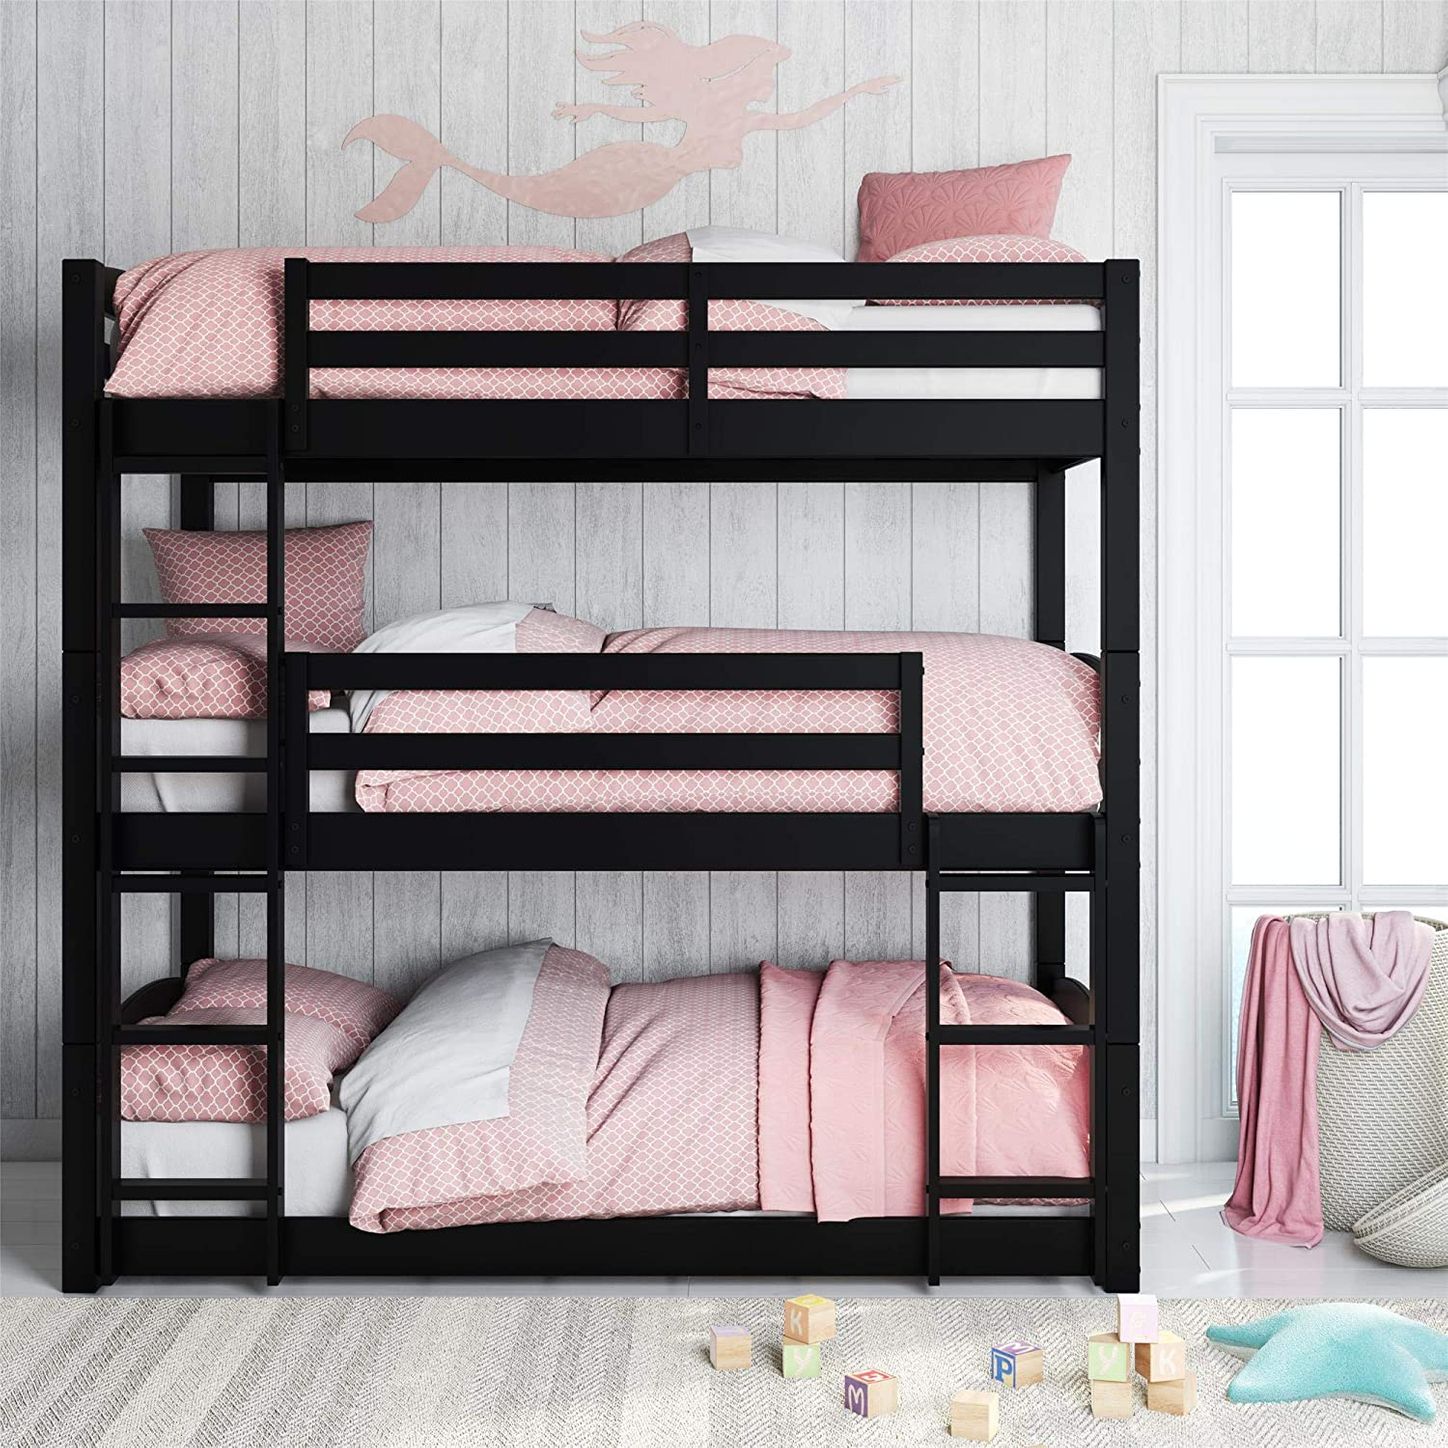 8 Best Bunk Beds 2020 The Strategist, Rooms To Go Bunk Bed Assembly Instructions